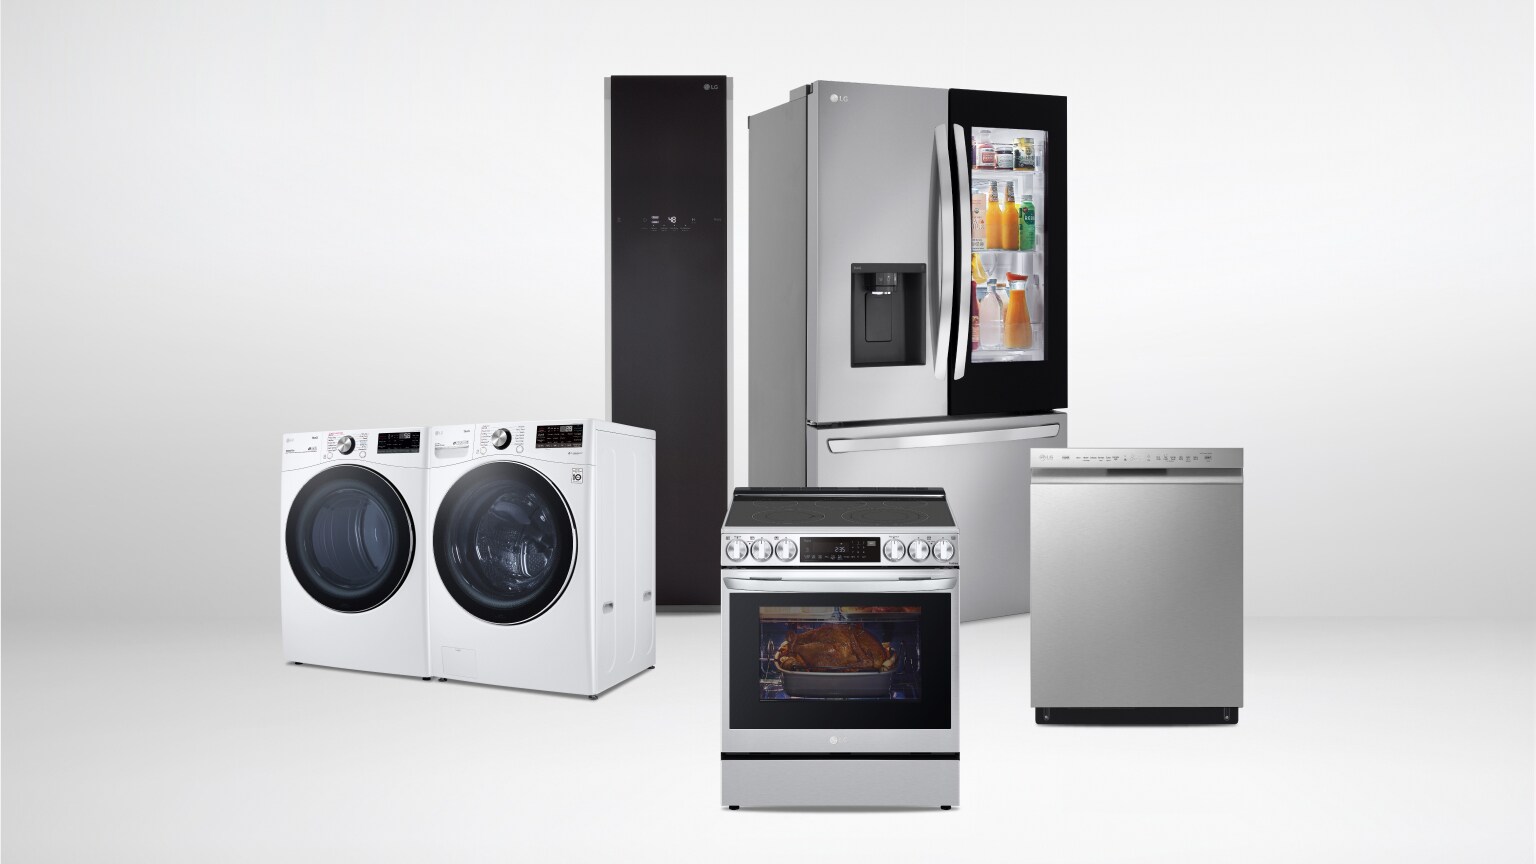 Save 30% or more on select home appliances